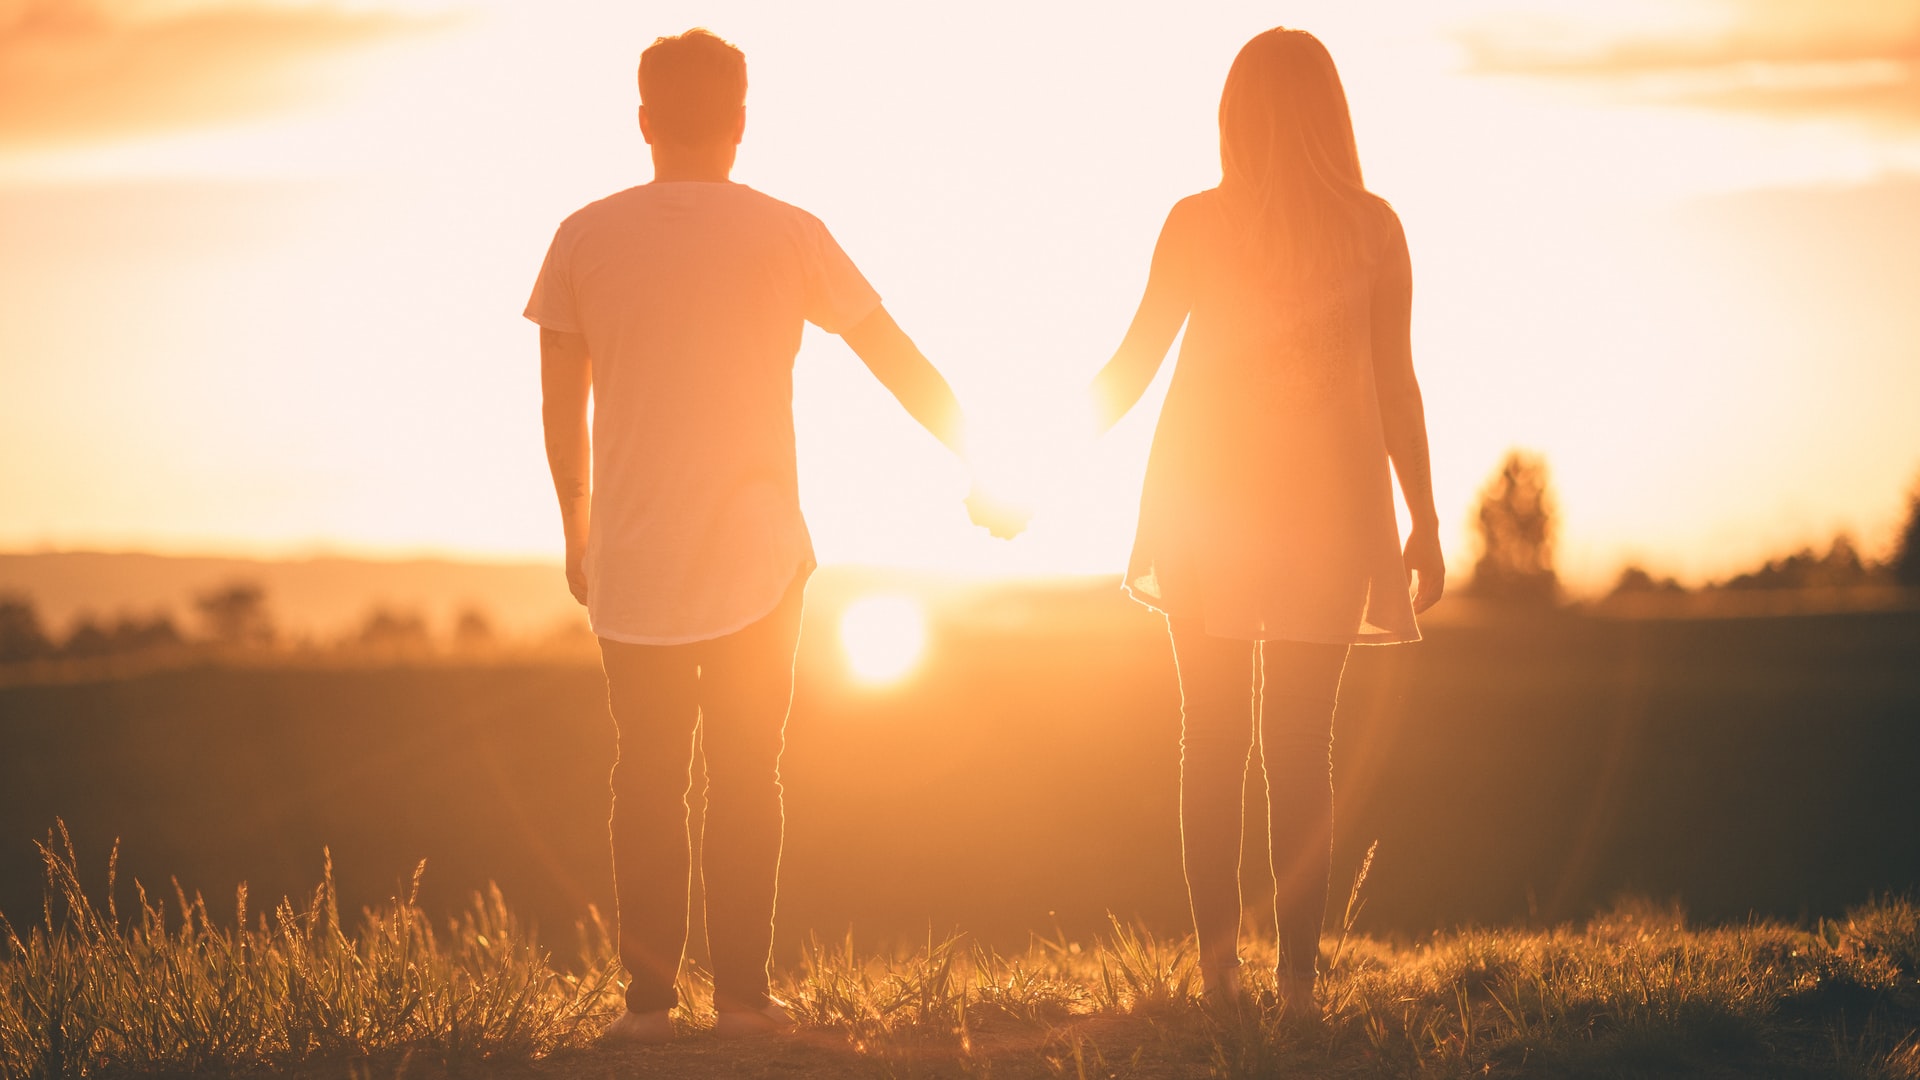 Soul mates held by hands in a grass field under the sunset